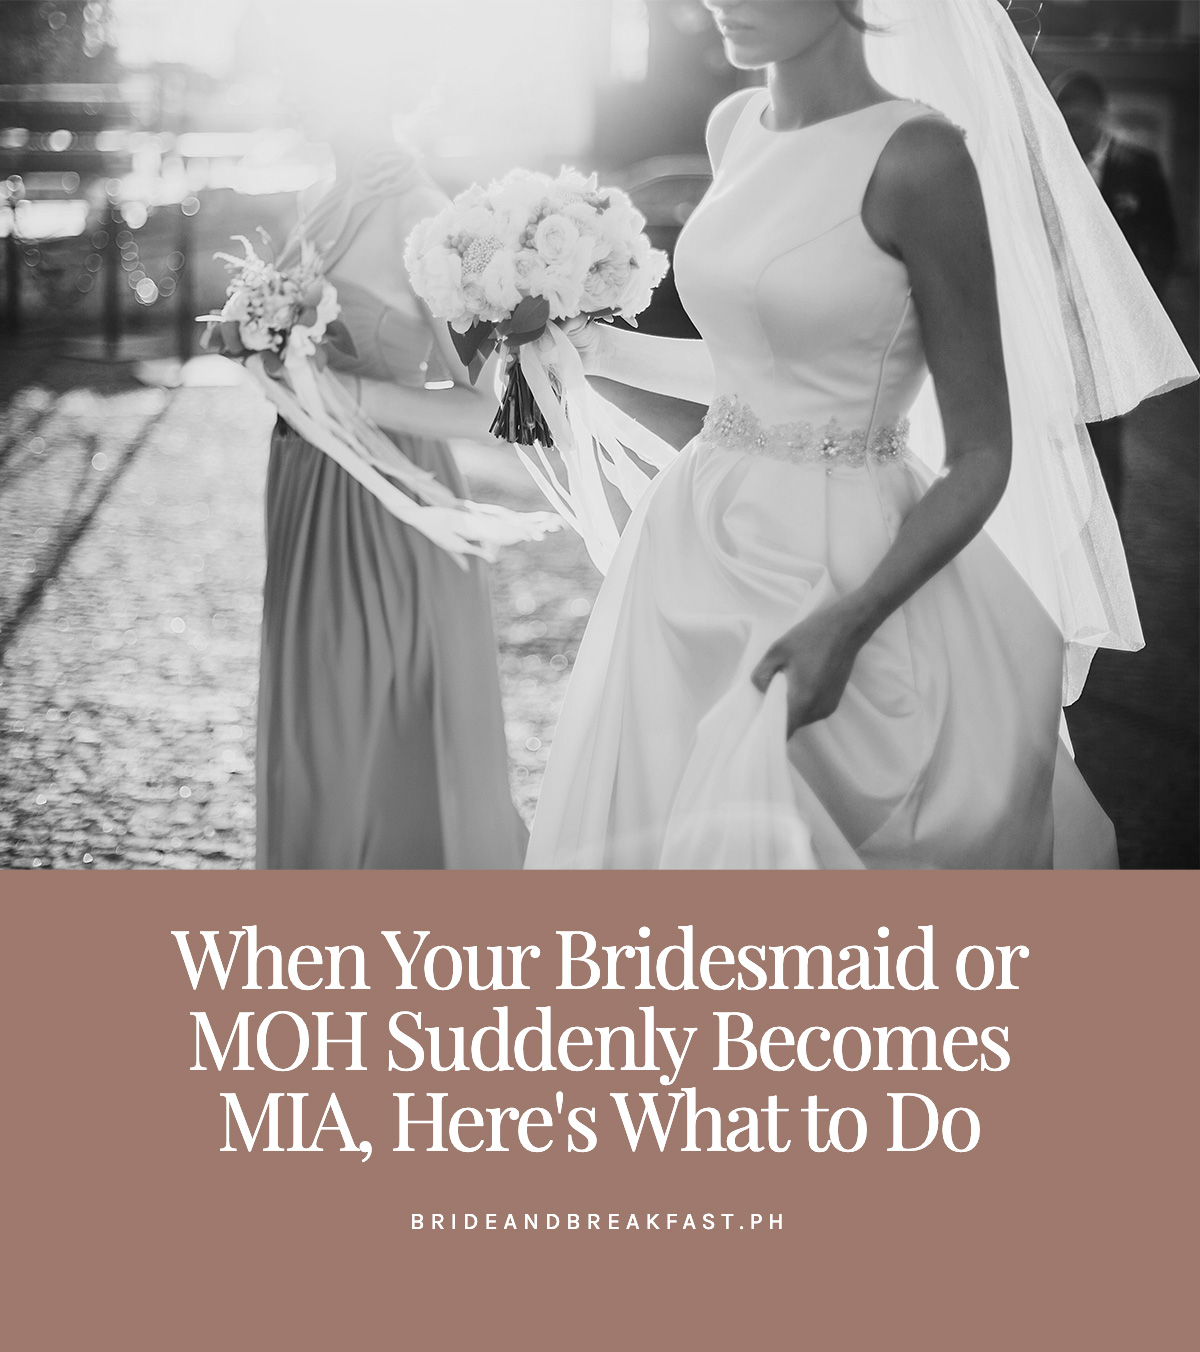 When Your Bridesmaid or MOH Suddenly Becomes MIA, Here's What to Do